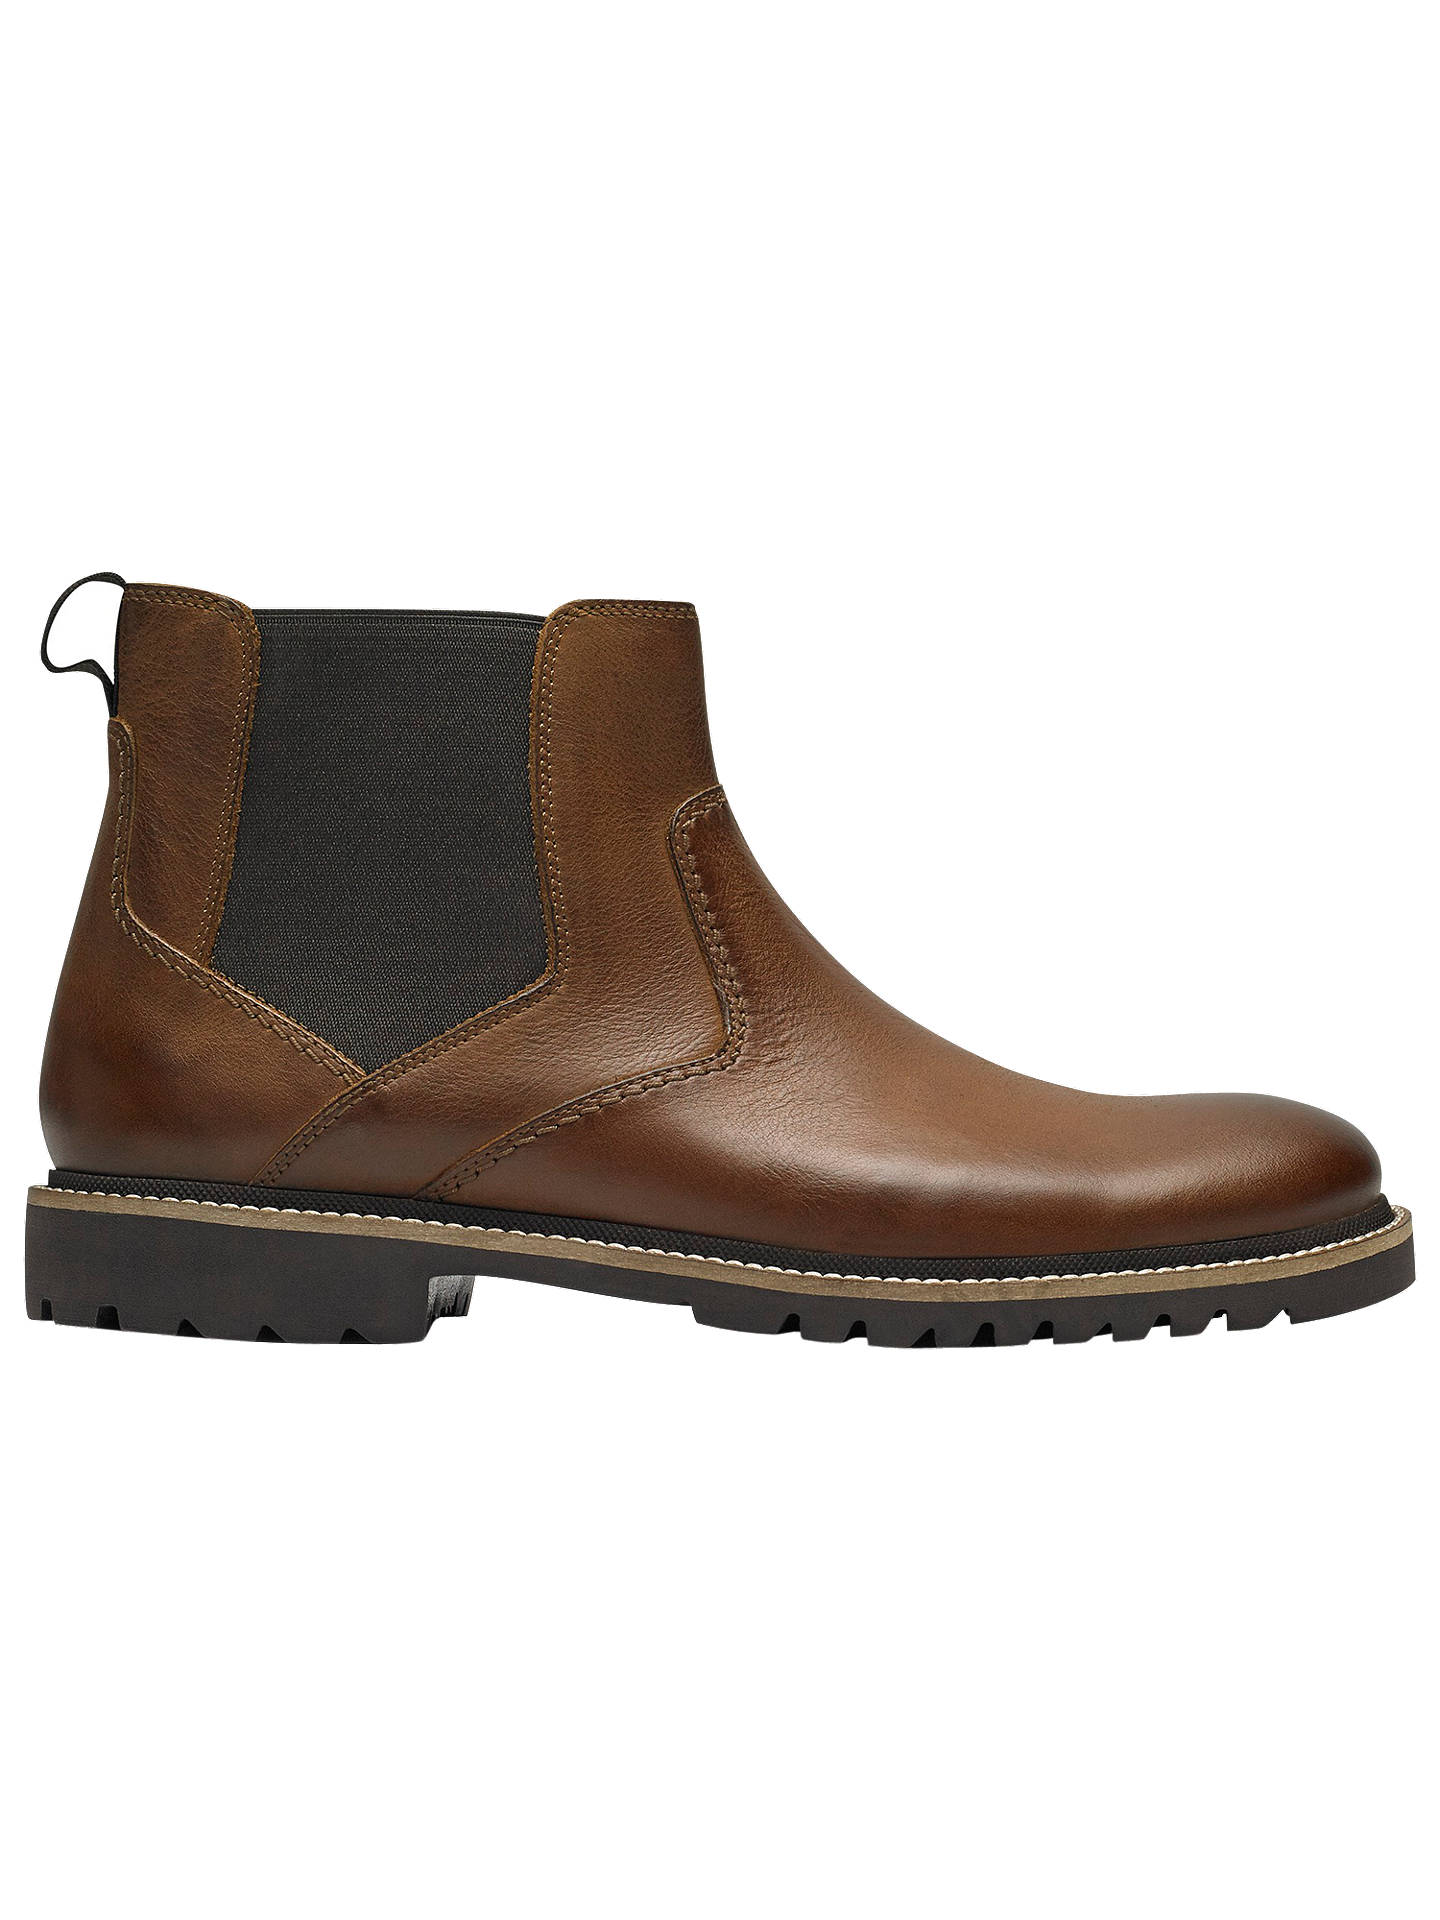 Rockport Marshall Chelsea Boots, Fawn at John Lewis & Partners